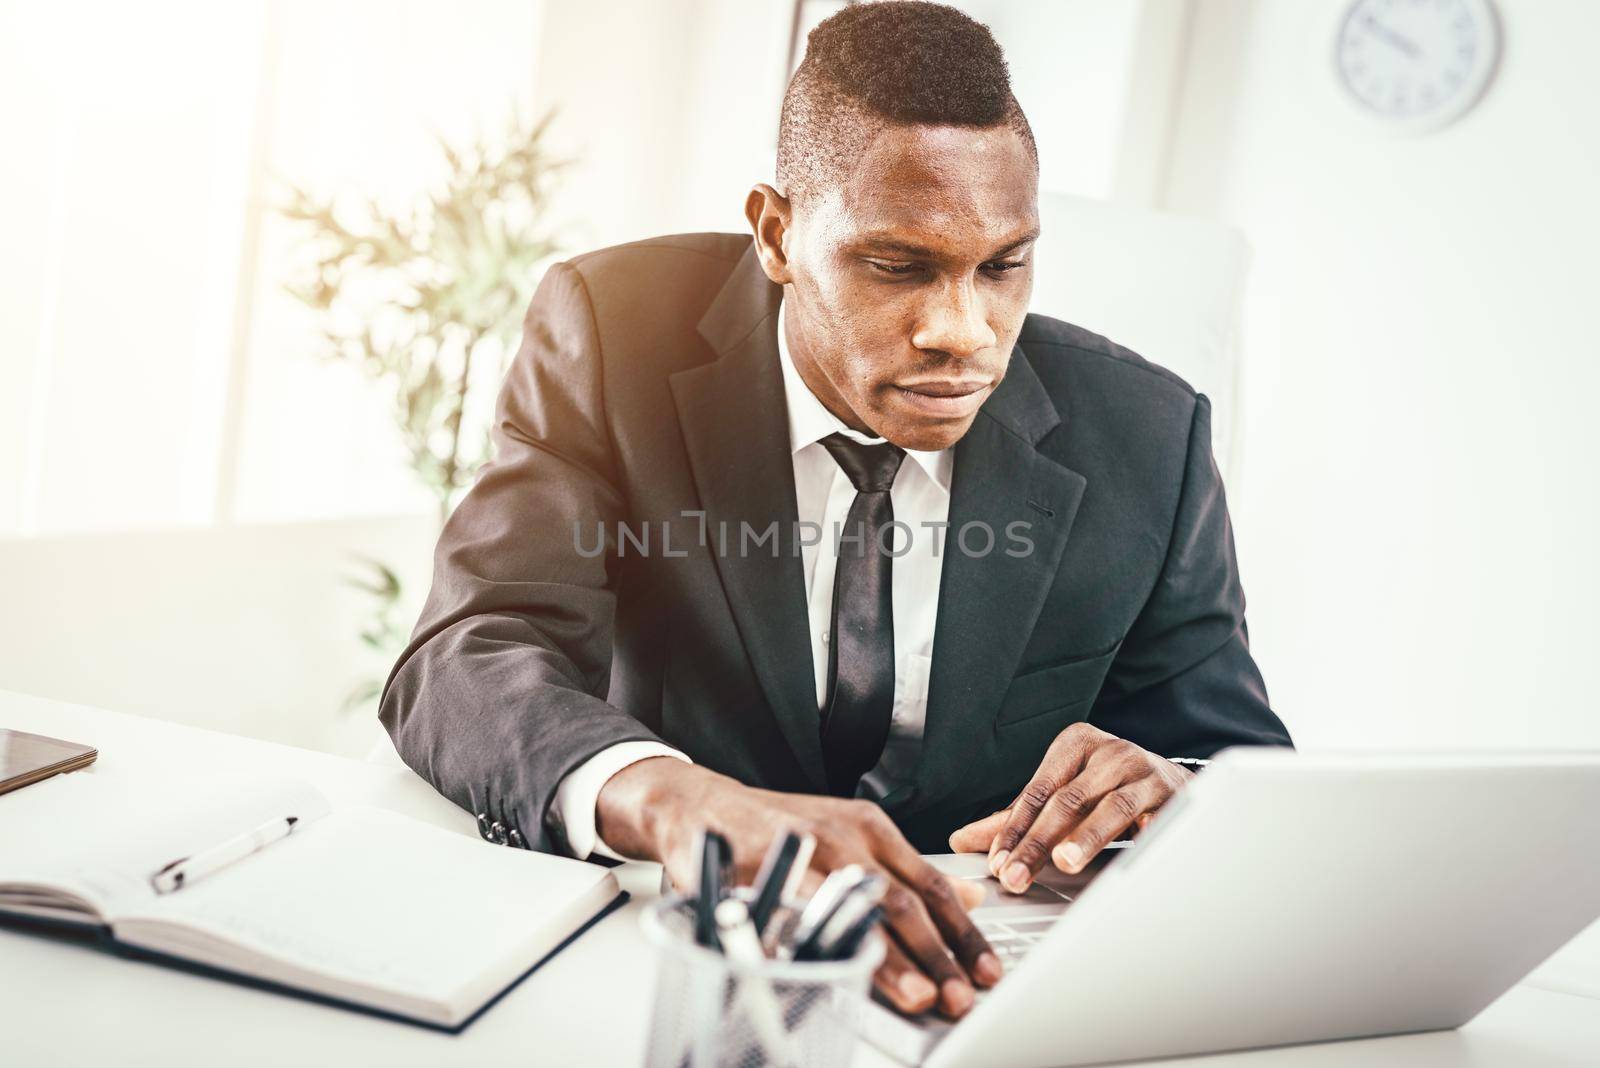 Pensive African businessman working on laptop in modern office.